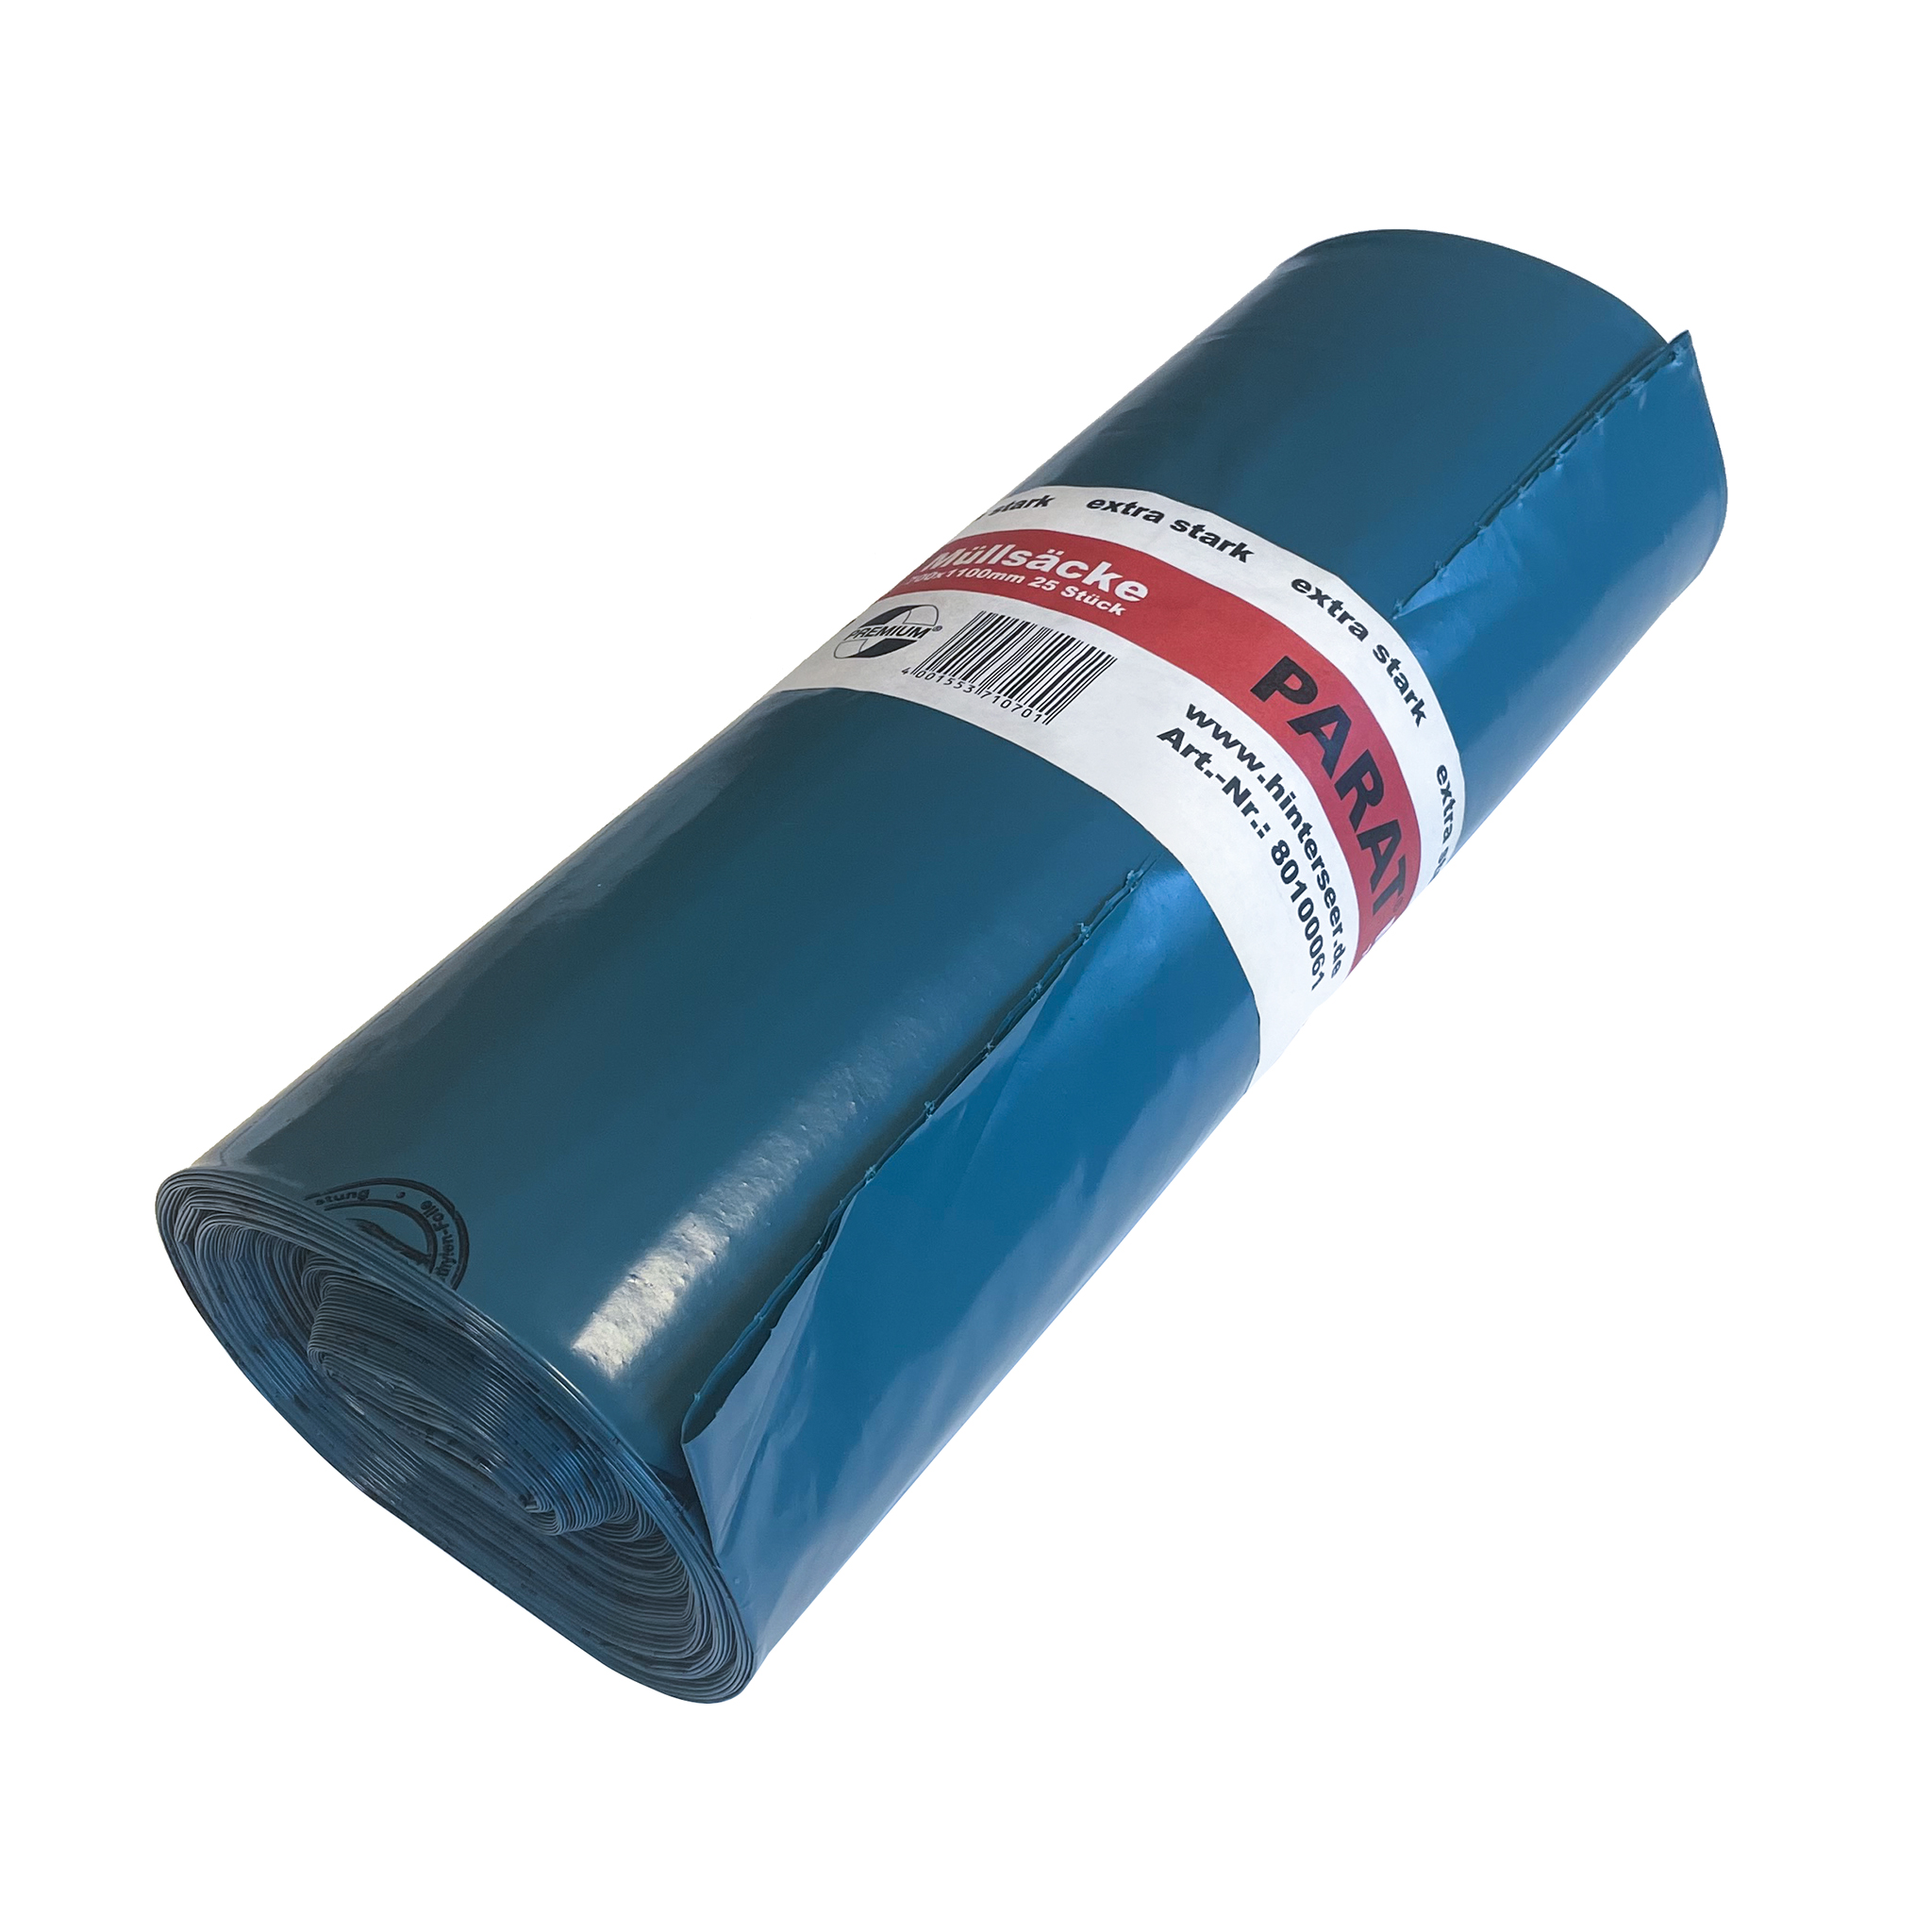 PARAT garbage bags blue "Extra Strong"